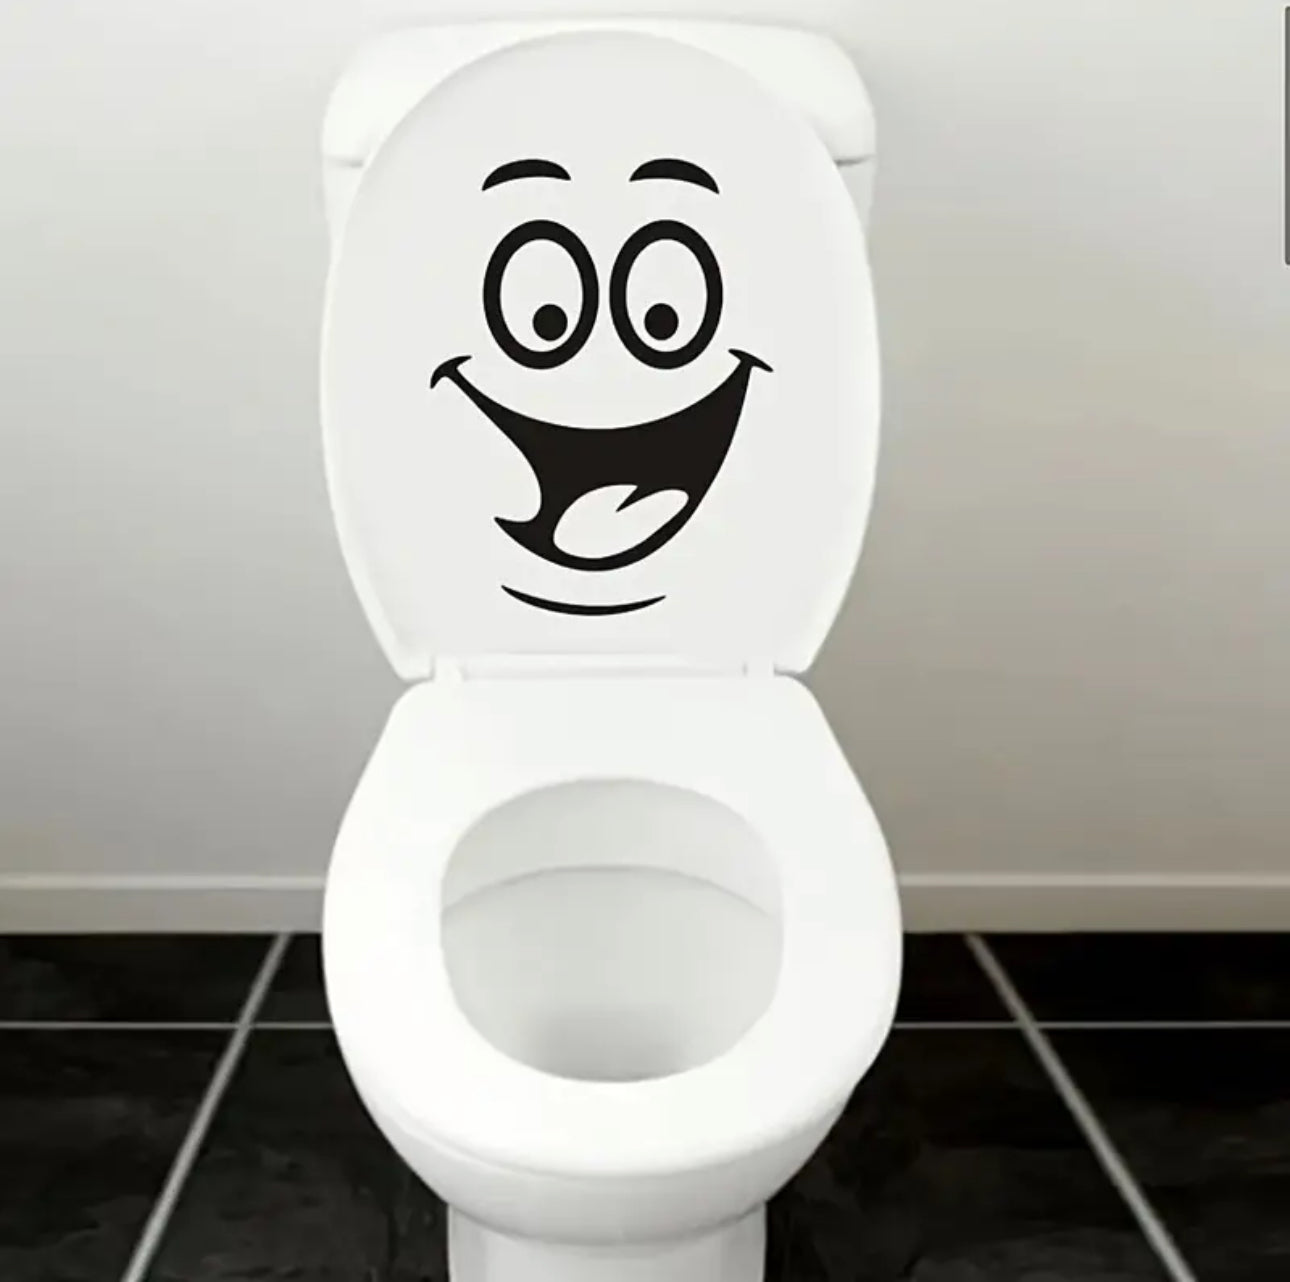 Funny Bathroom Toilet Decal- Smiling Face